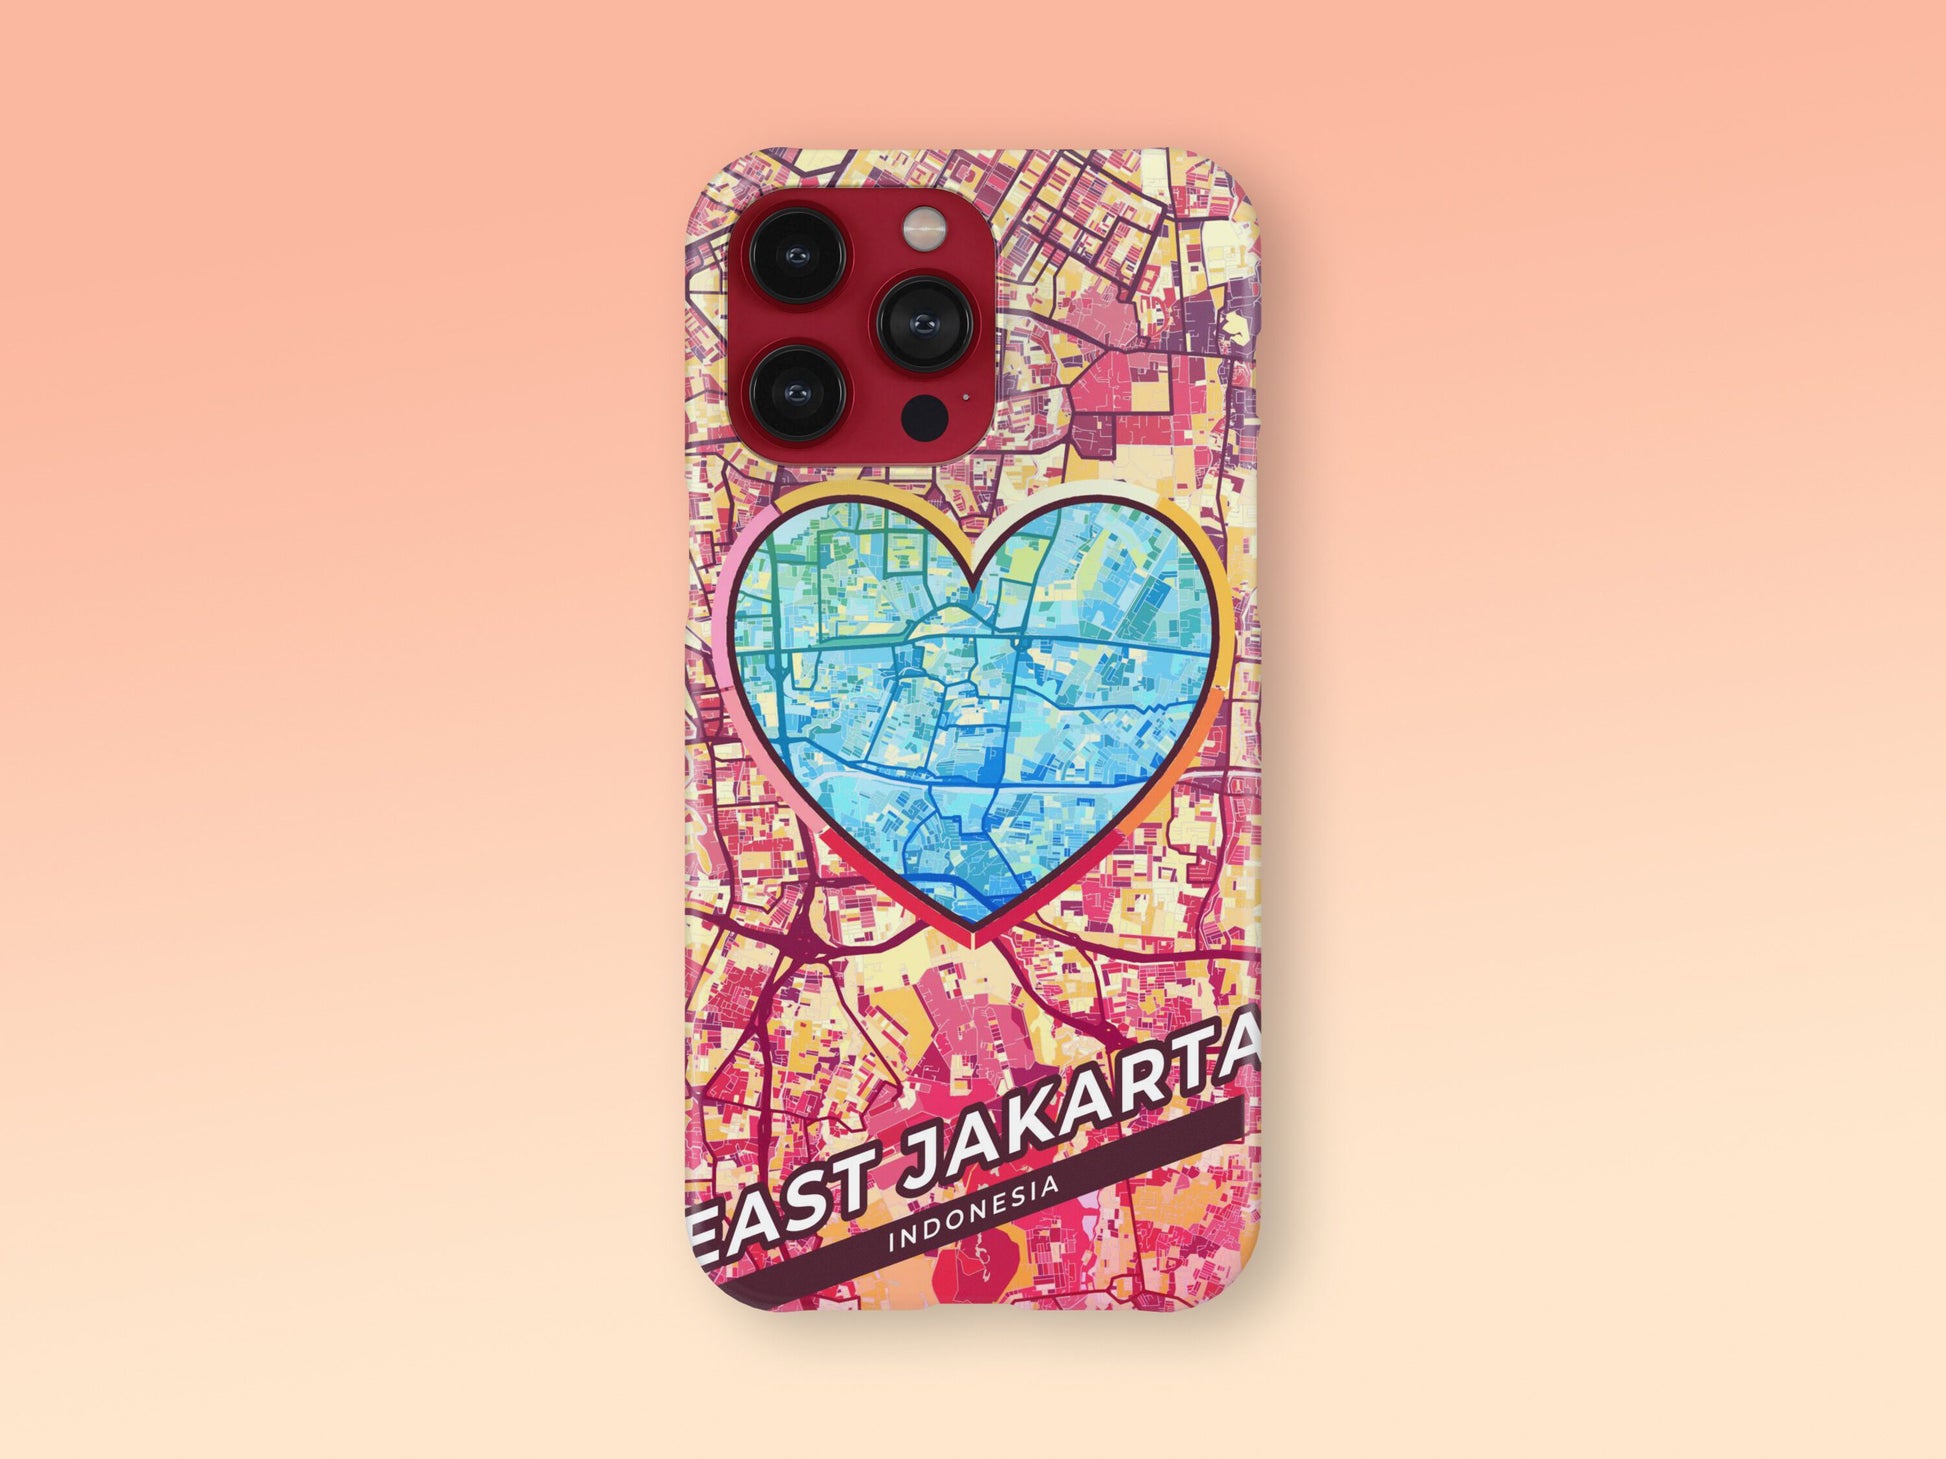 East Jakarta Indonesia slim phone case with colorful icon. Birthday, wedding or housewarming gift. Couple match cases. 2